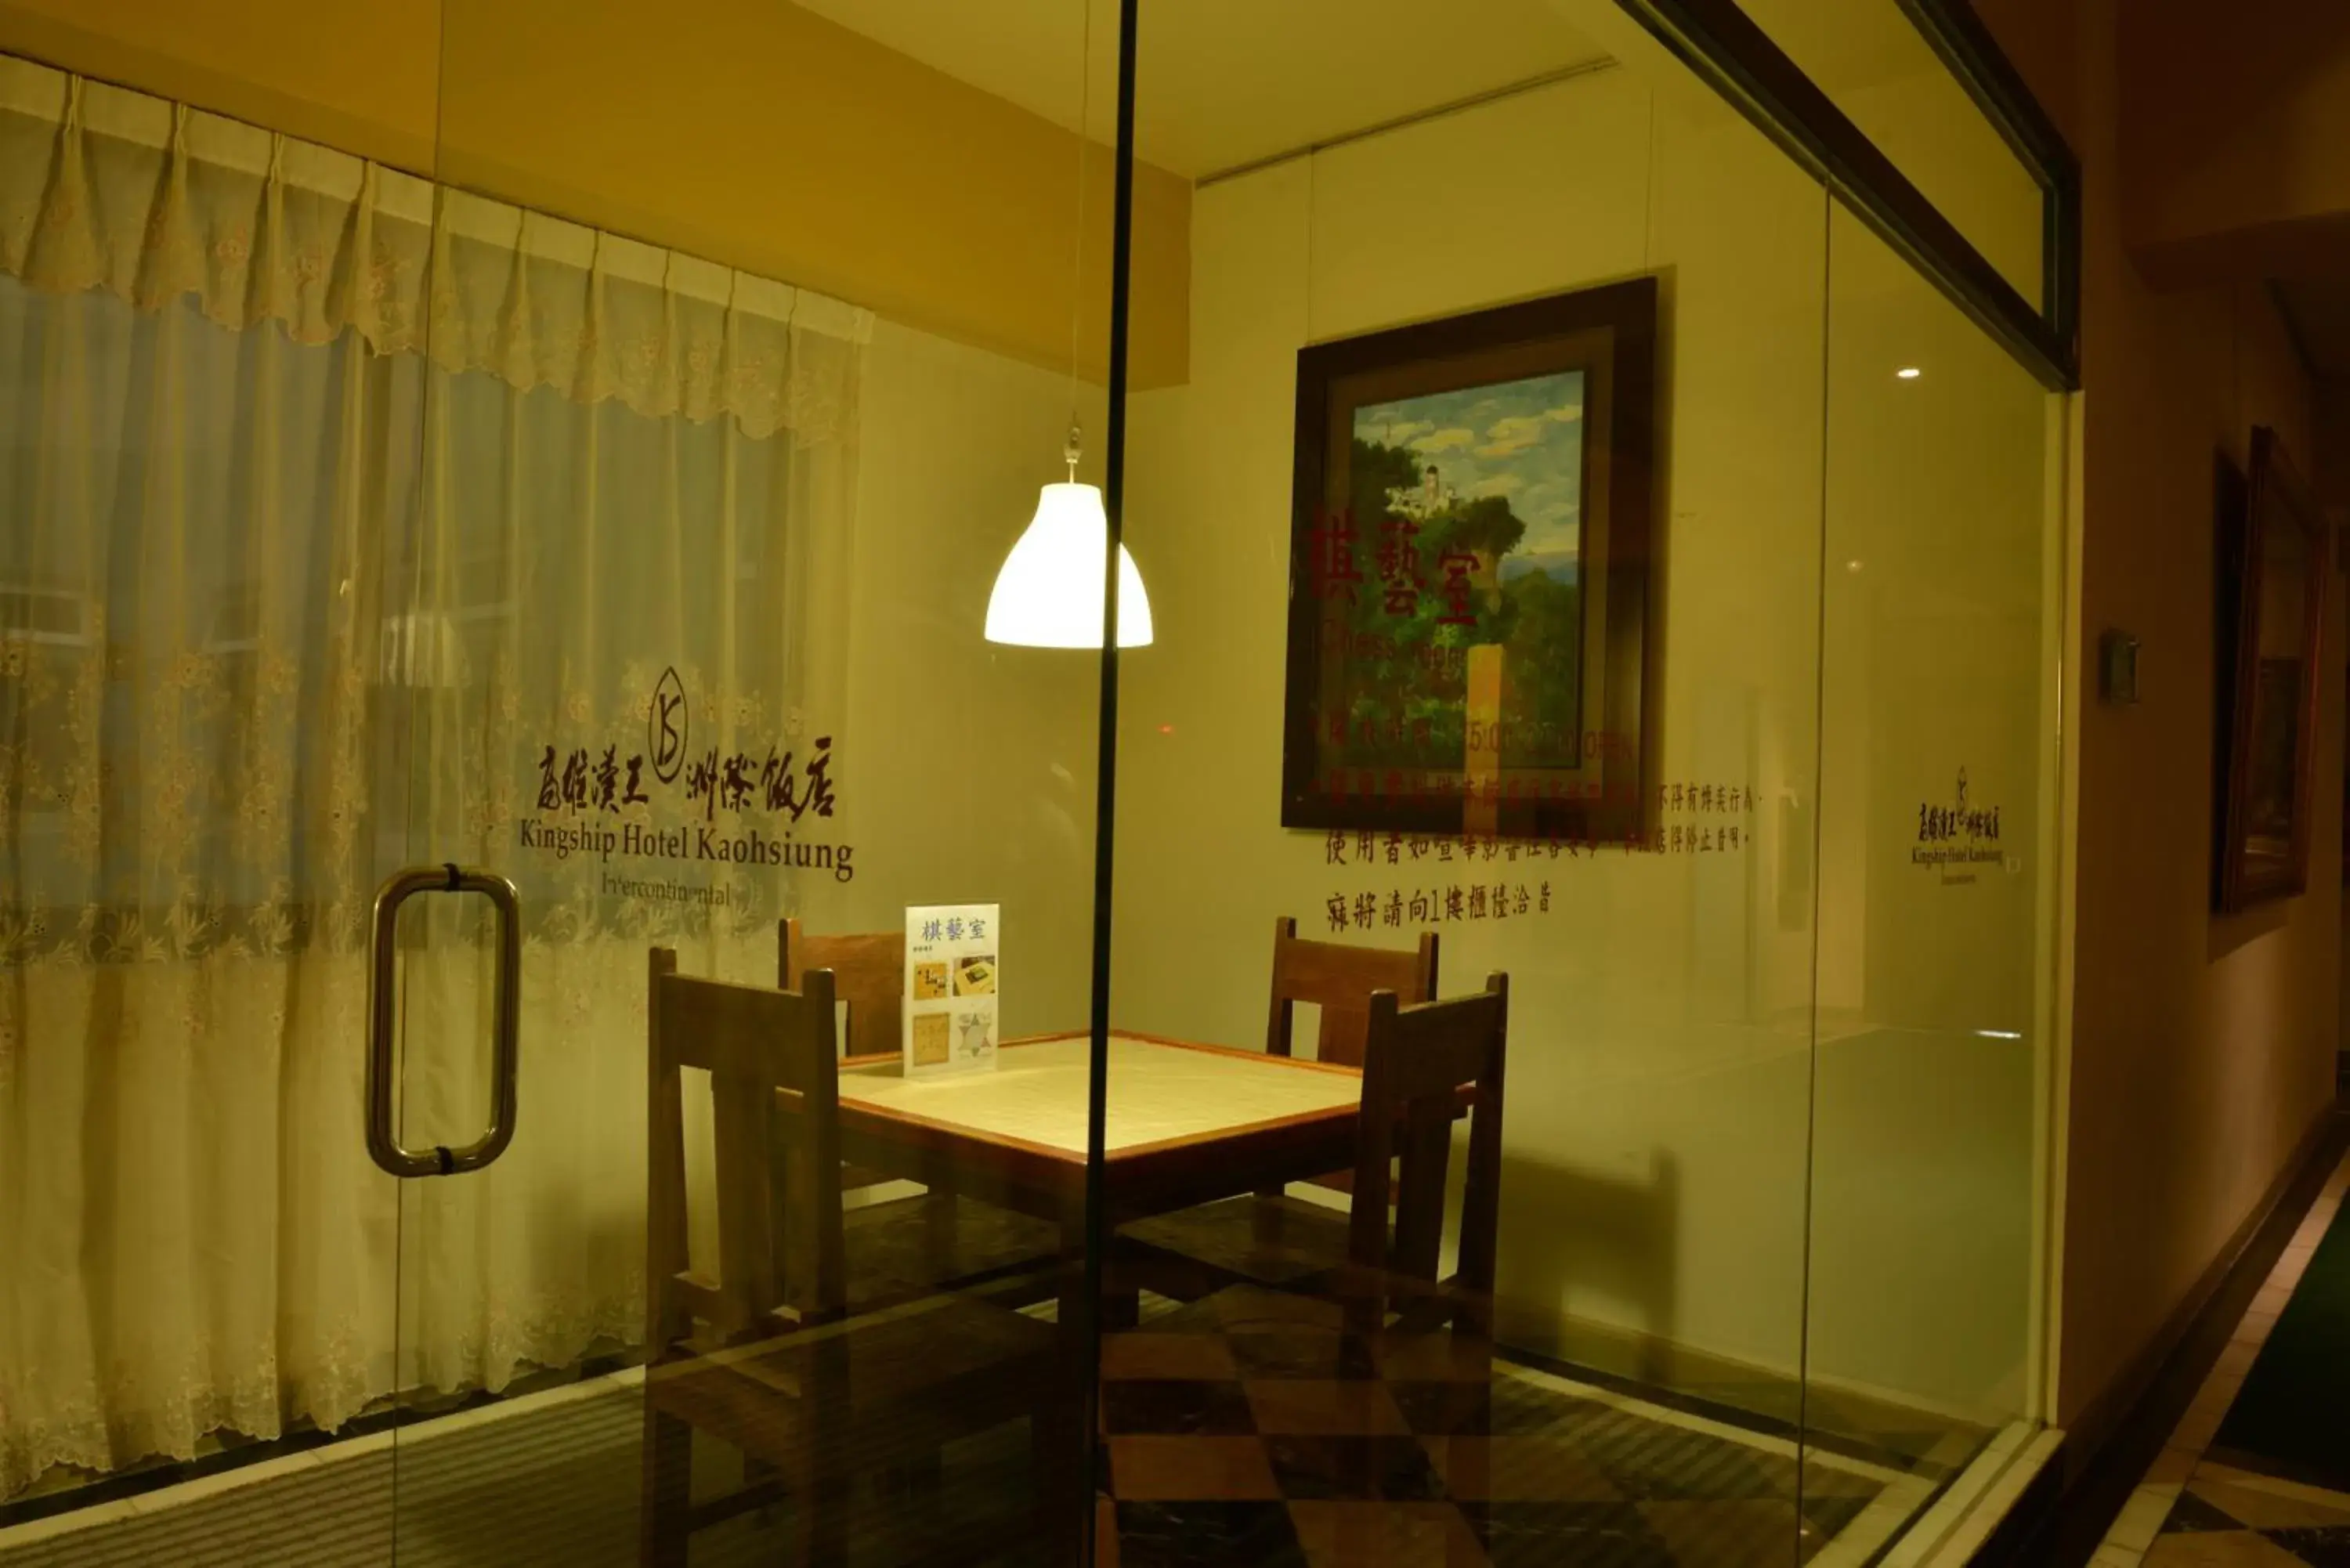 Dining Area in Kingship Hotel Kaohsiung Inter Continental